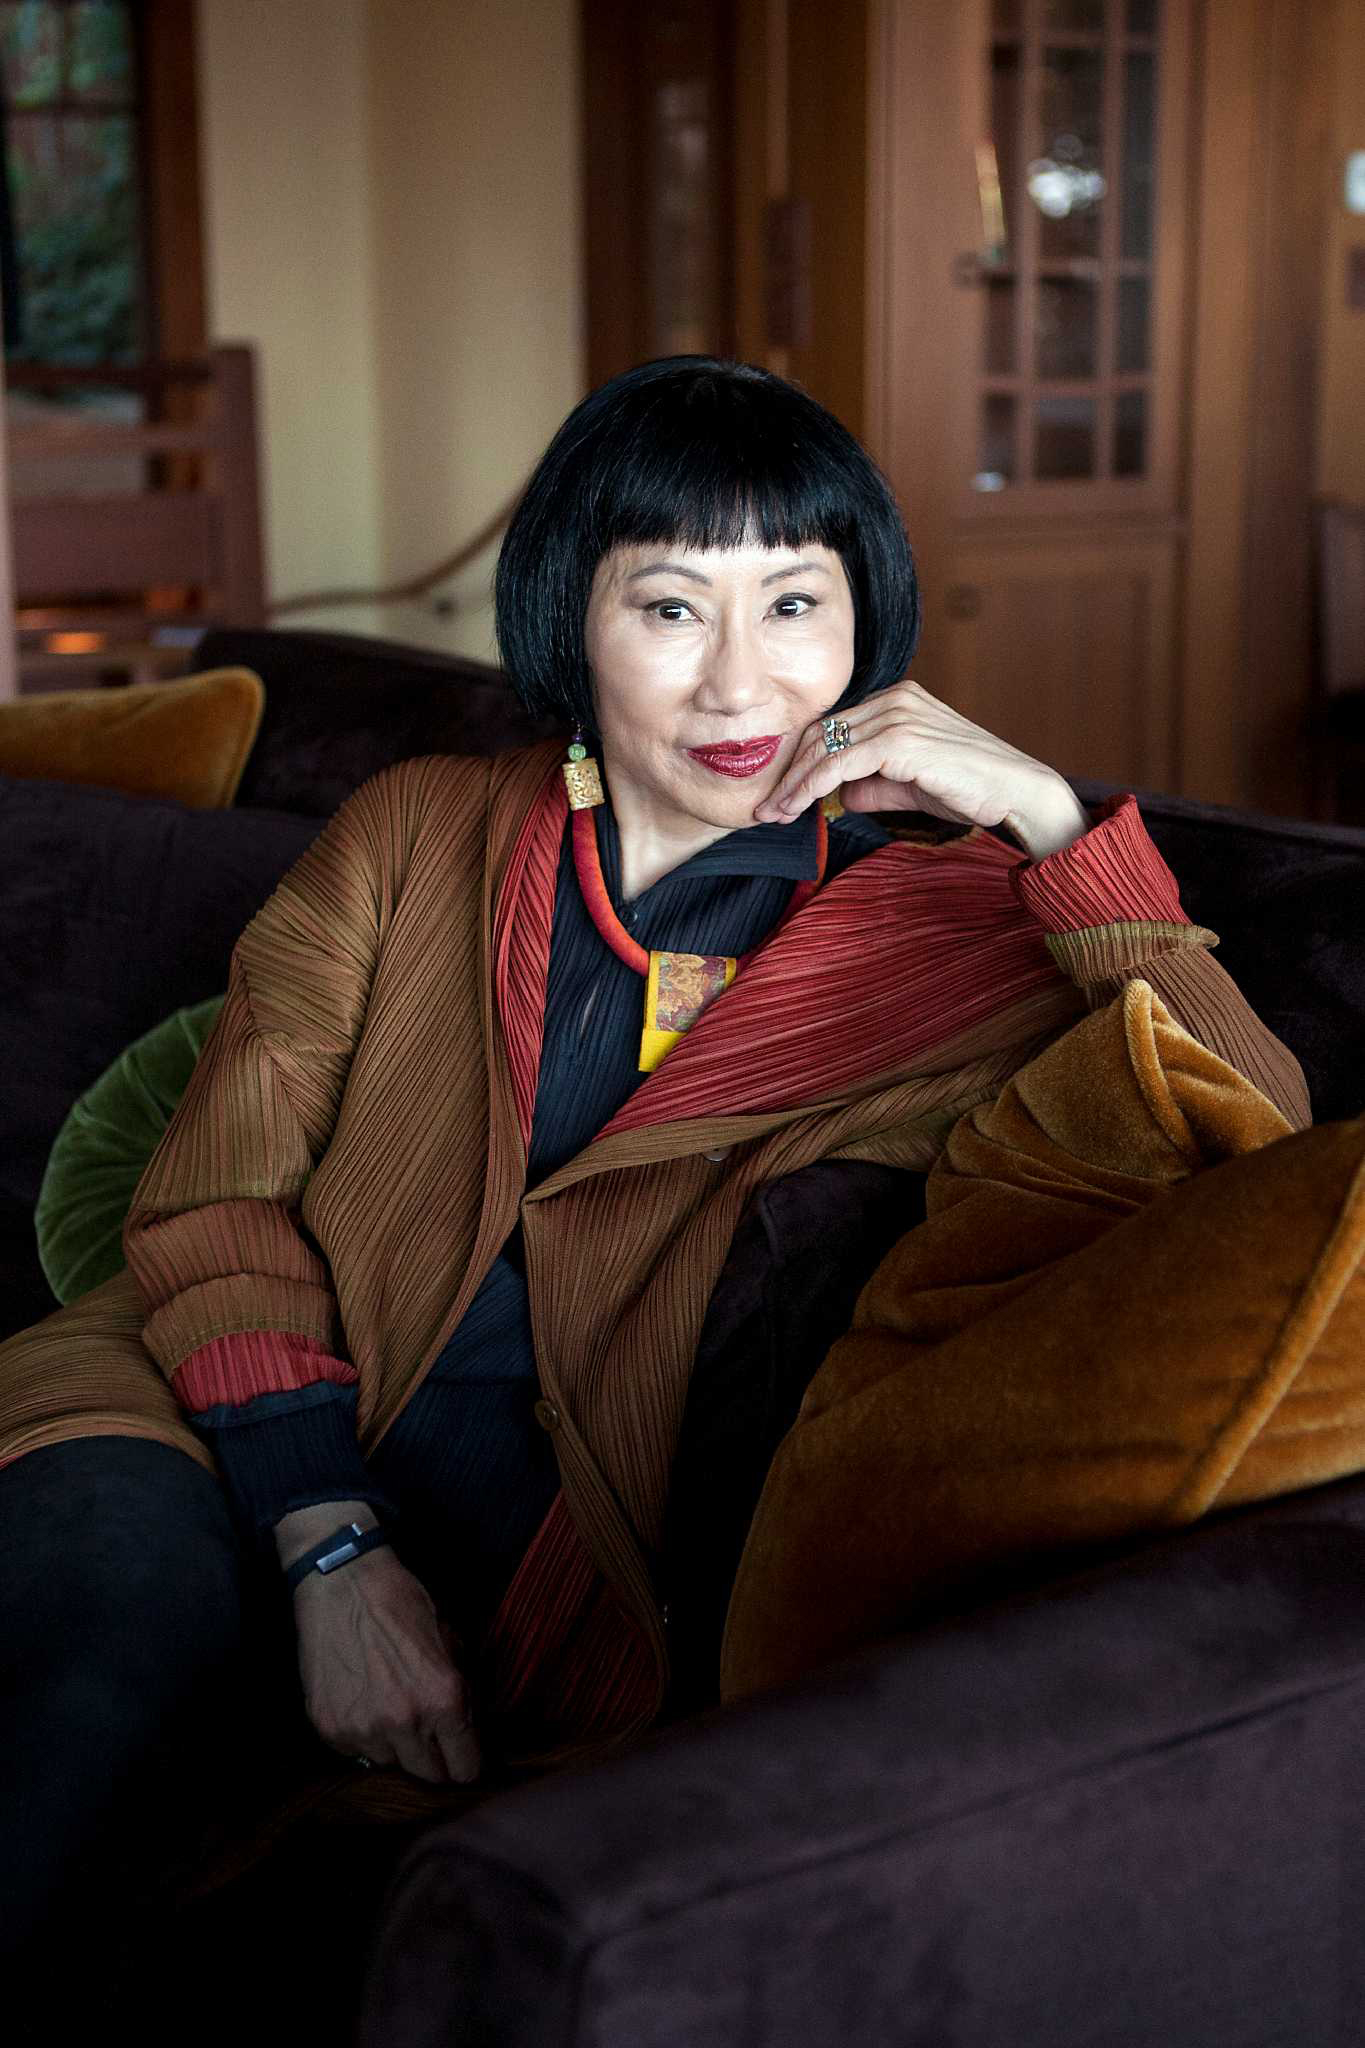 October 29, 2013: Author Amy Tan poses for a portrait at her home in Sausalito, California. (Michael Short)